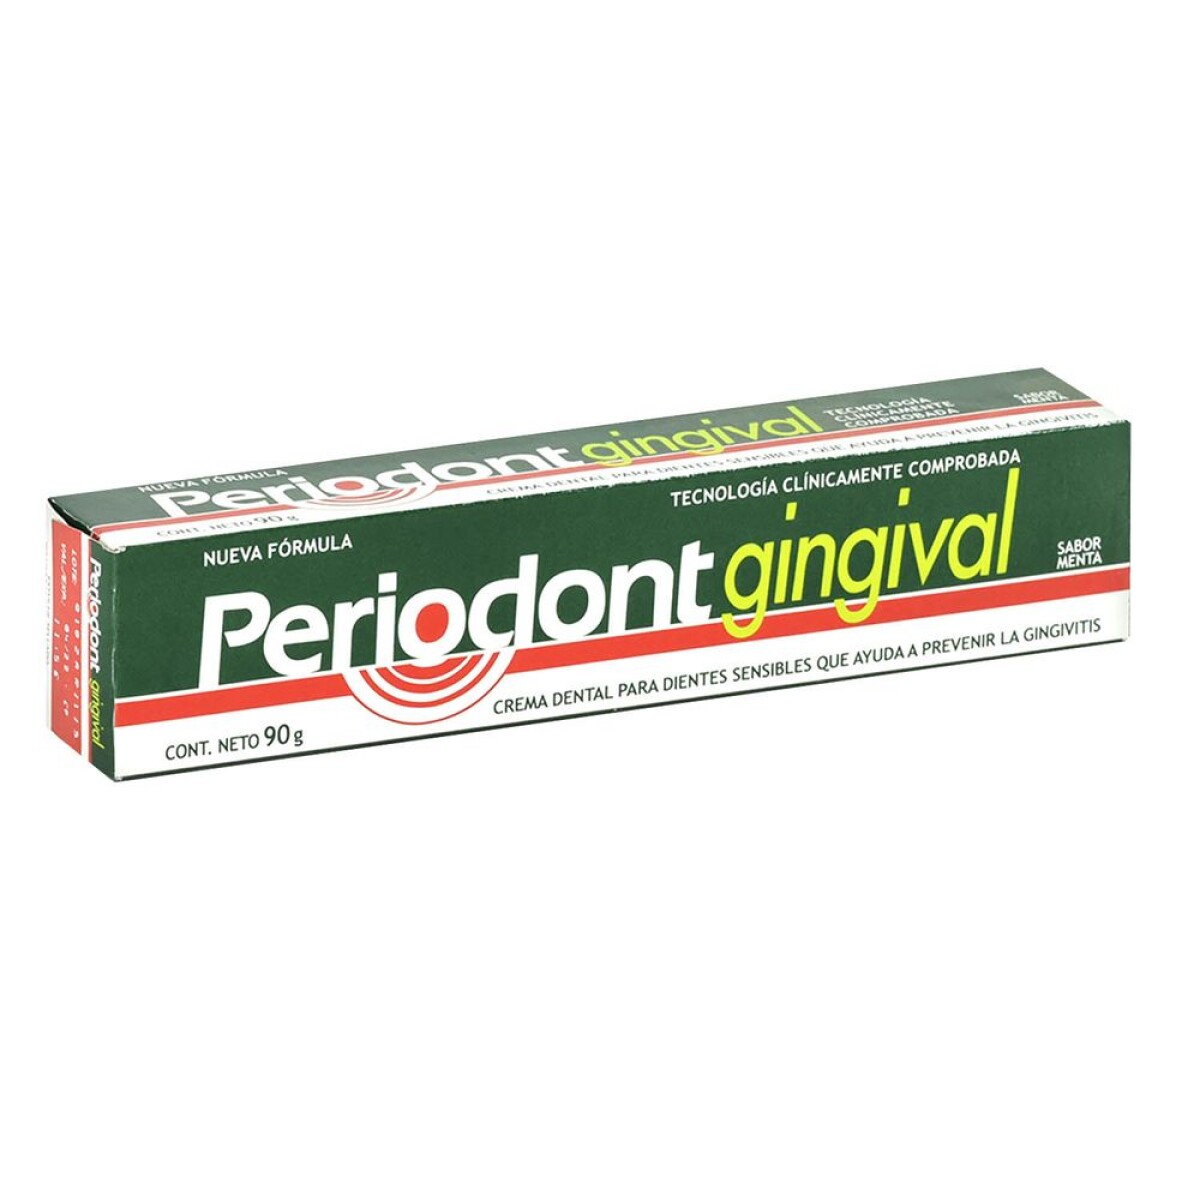 PERIODONT GINGIVAL 